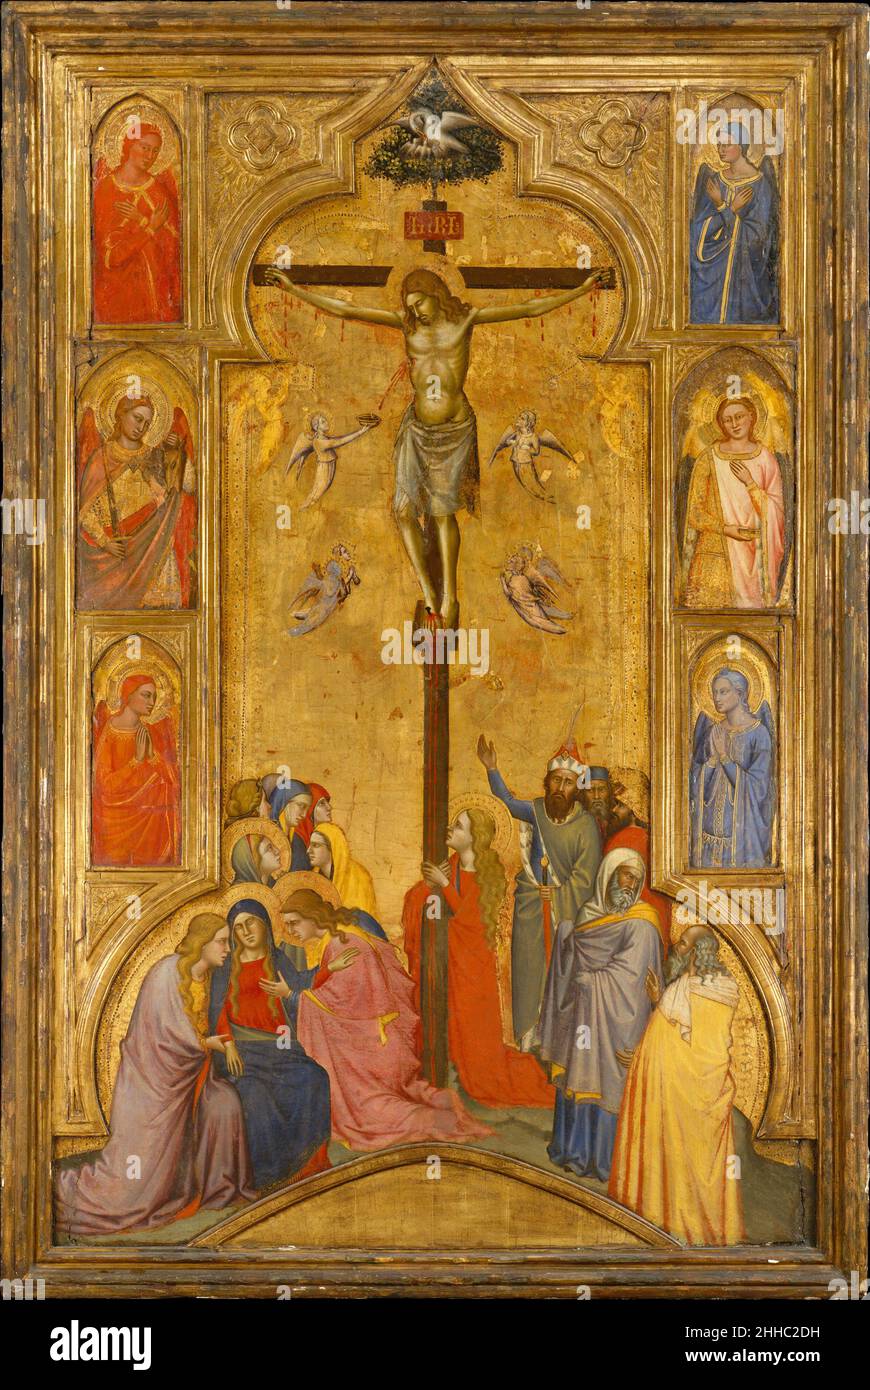 The Crucifixion ca. 1365 Andrea di Cione (Orcagna) Italian The Crucifixion and the six half-length angels mounted within the frame are fragments of an altarpiece; however their current arrangement does not reflect that of the original altarpiece but rather a reconfiguration by a 19th-century collector. The Crucifixion originally formed the altarpiece's central pinnacle while the Six Angels originally comprised pilasters. The altarpiece was probably painted for Santa Maria degli Angeli, the Camaldolese church of Florence, perhaps for the chapel founded in 1365 and dedicated to Ognissanti (All S Stock Photo